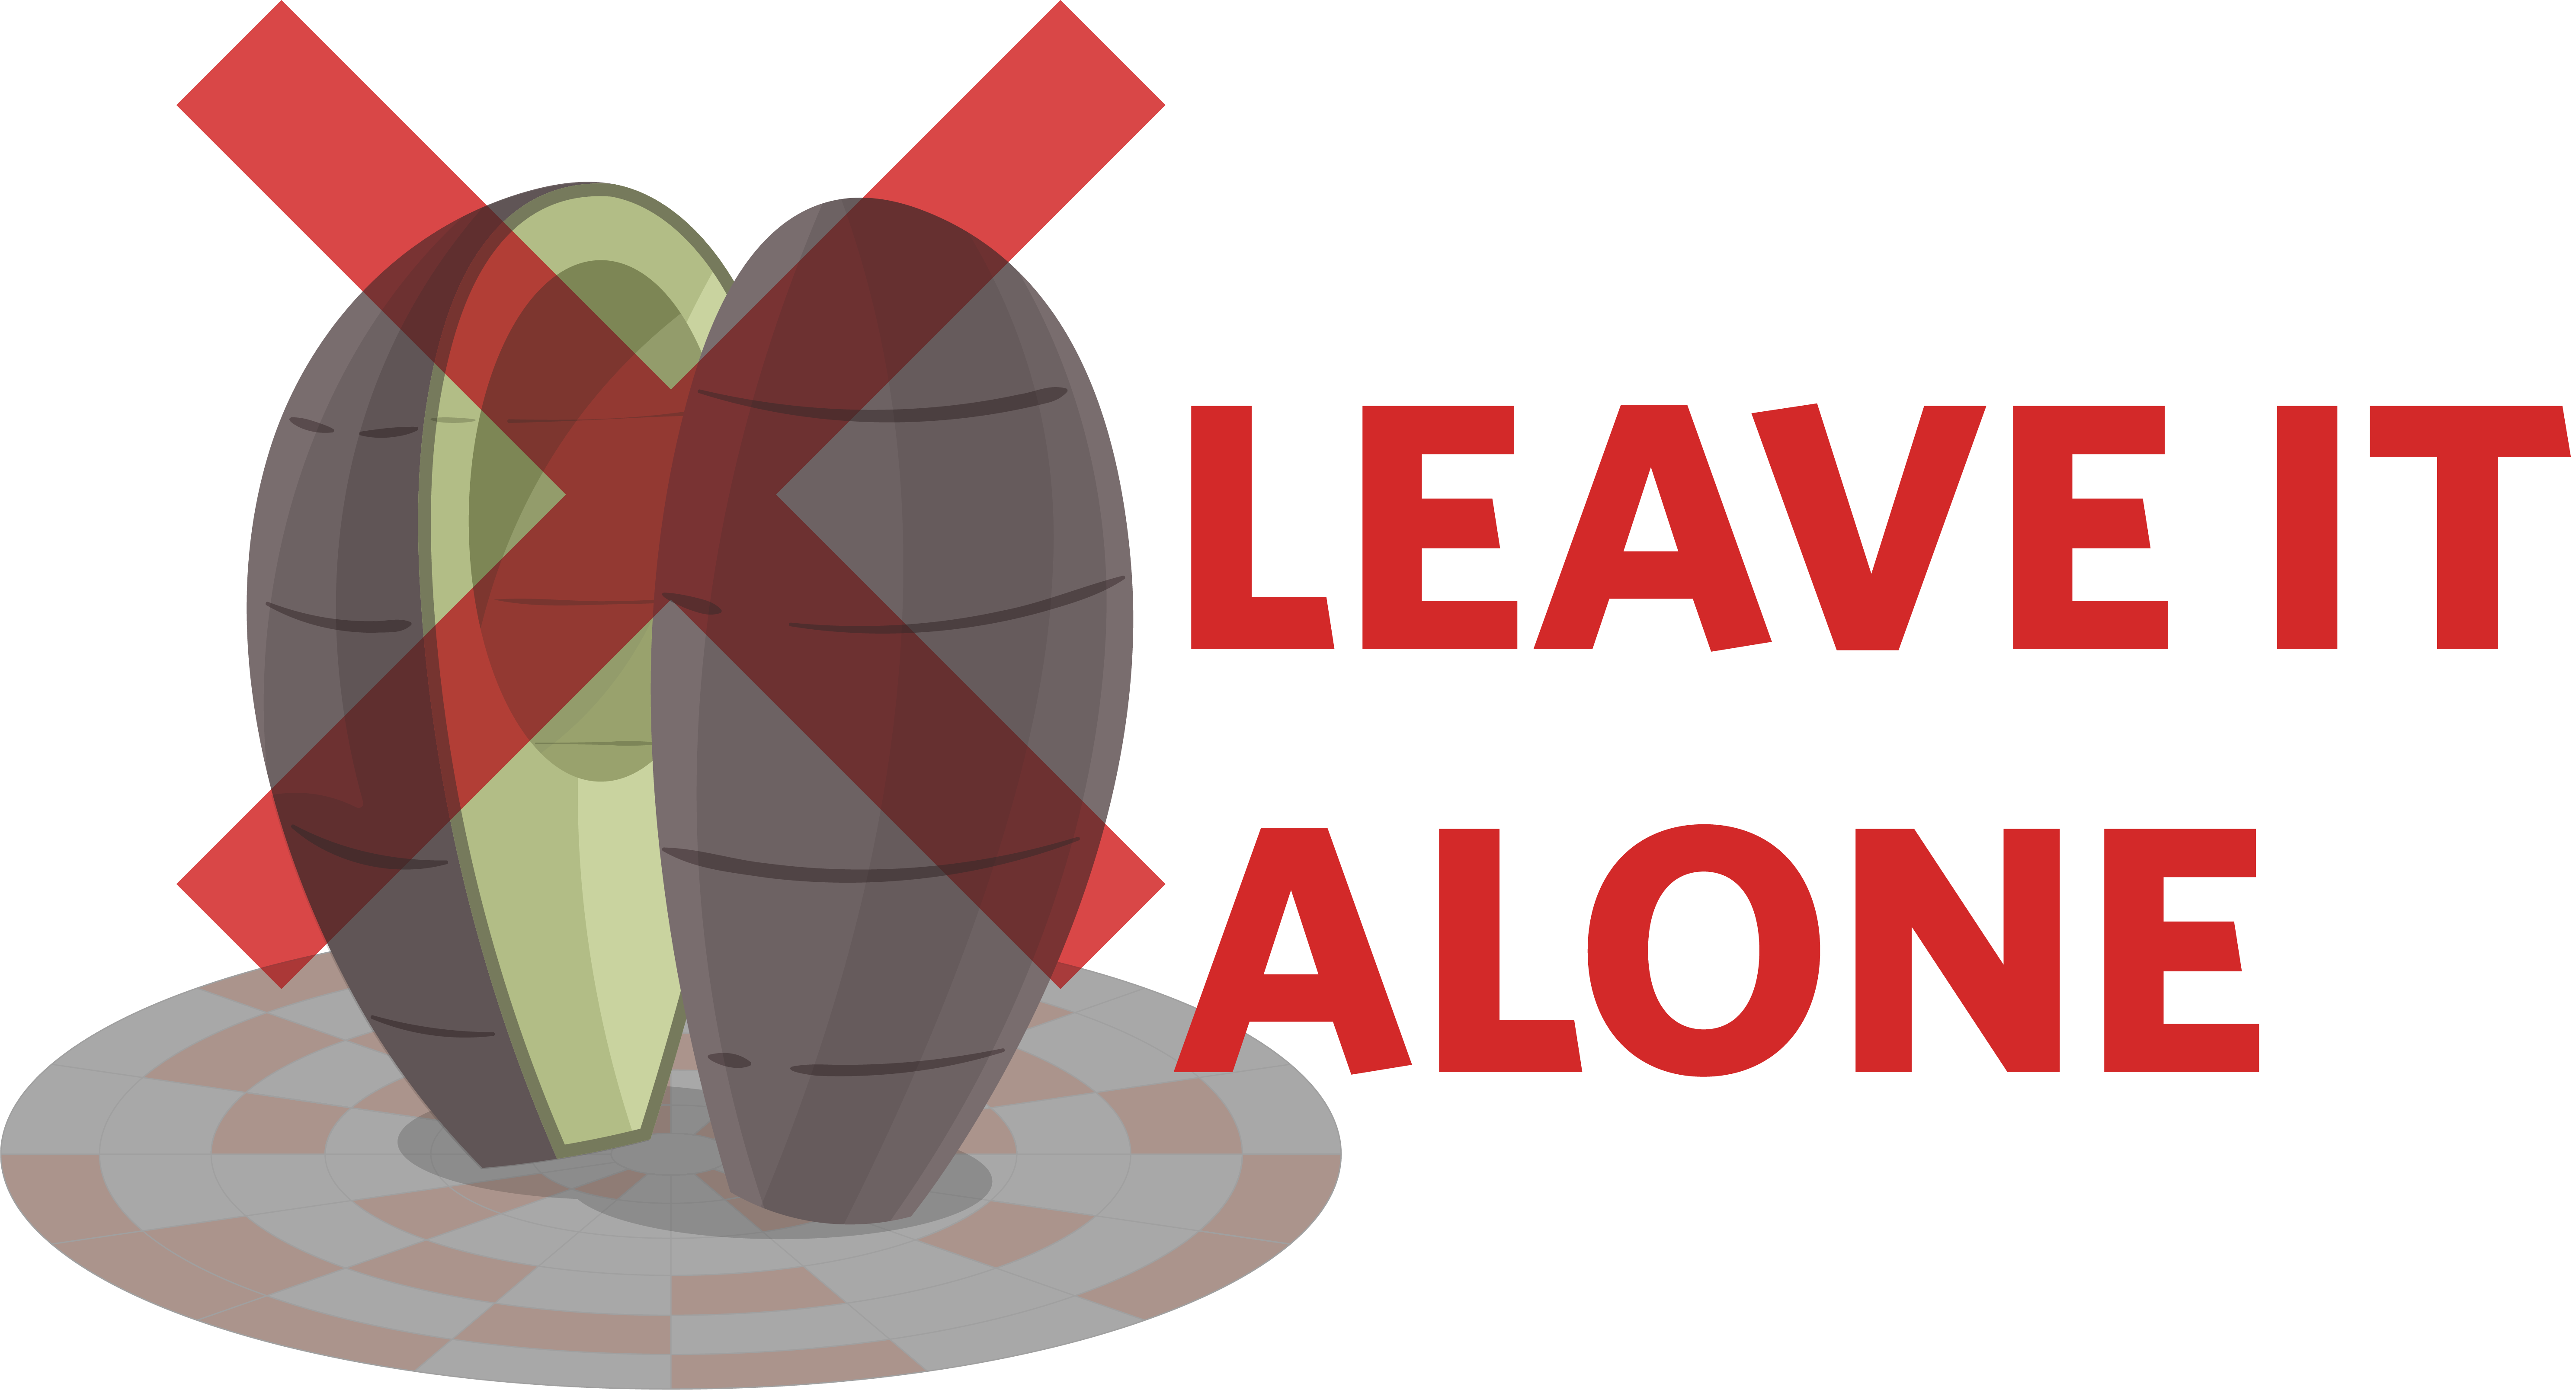 A picture of the SFU Avocado crossed out with the words “Leave it alone” beside it